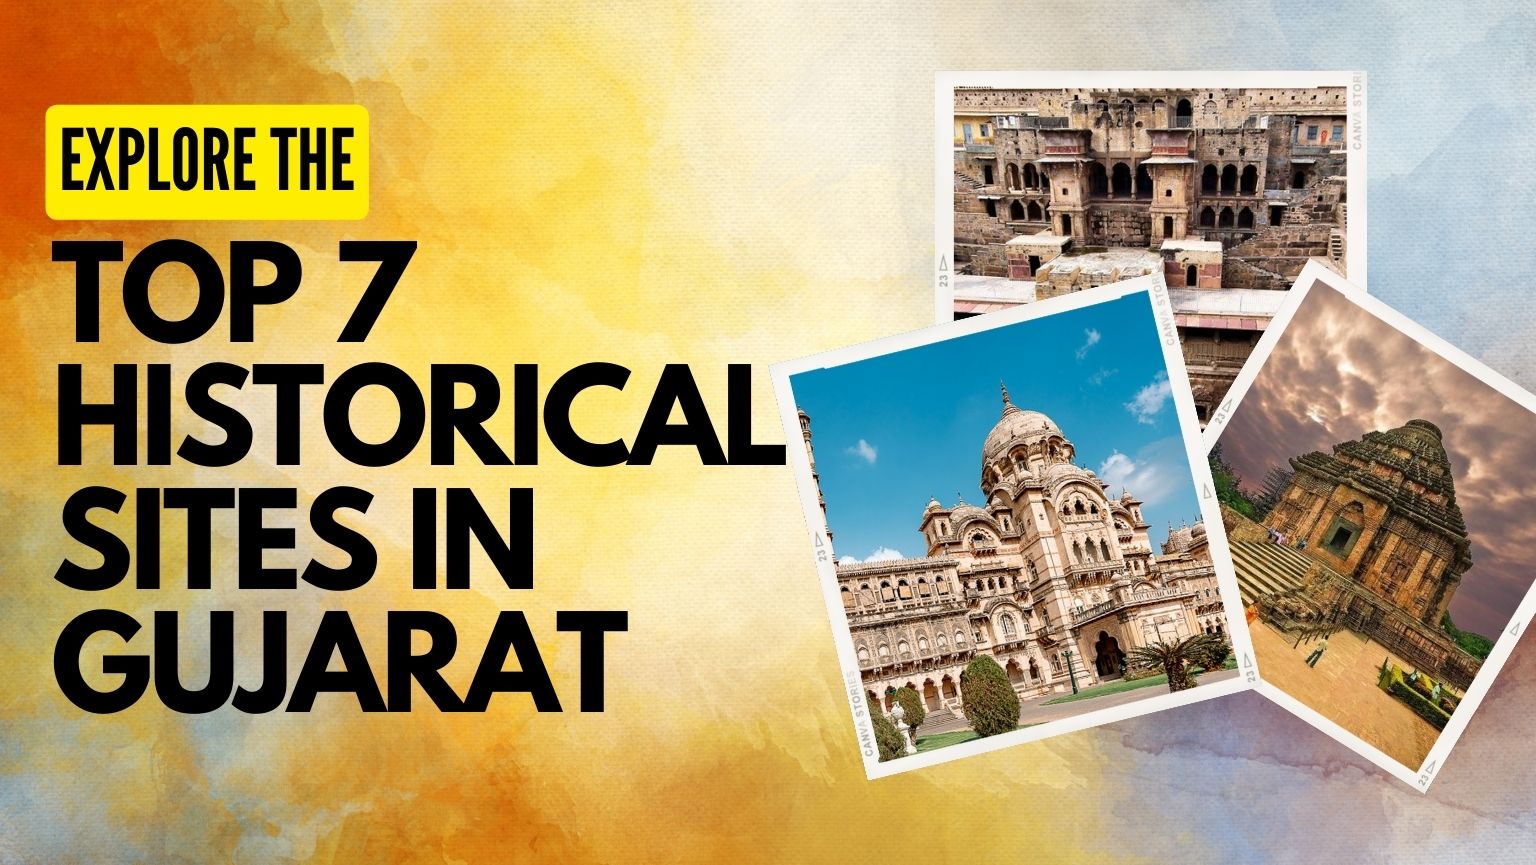 Explore the Top 7 Historical Sites in Gujarat